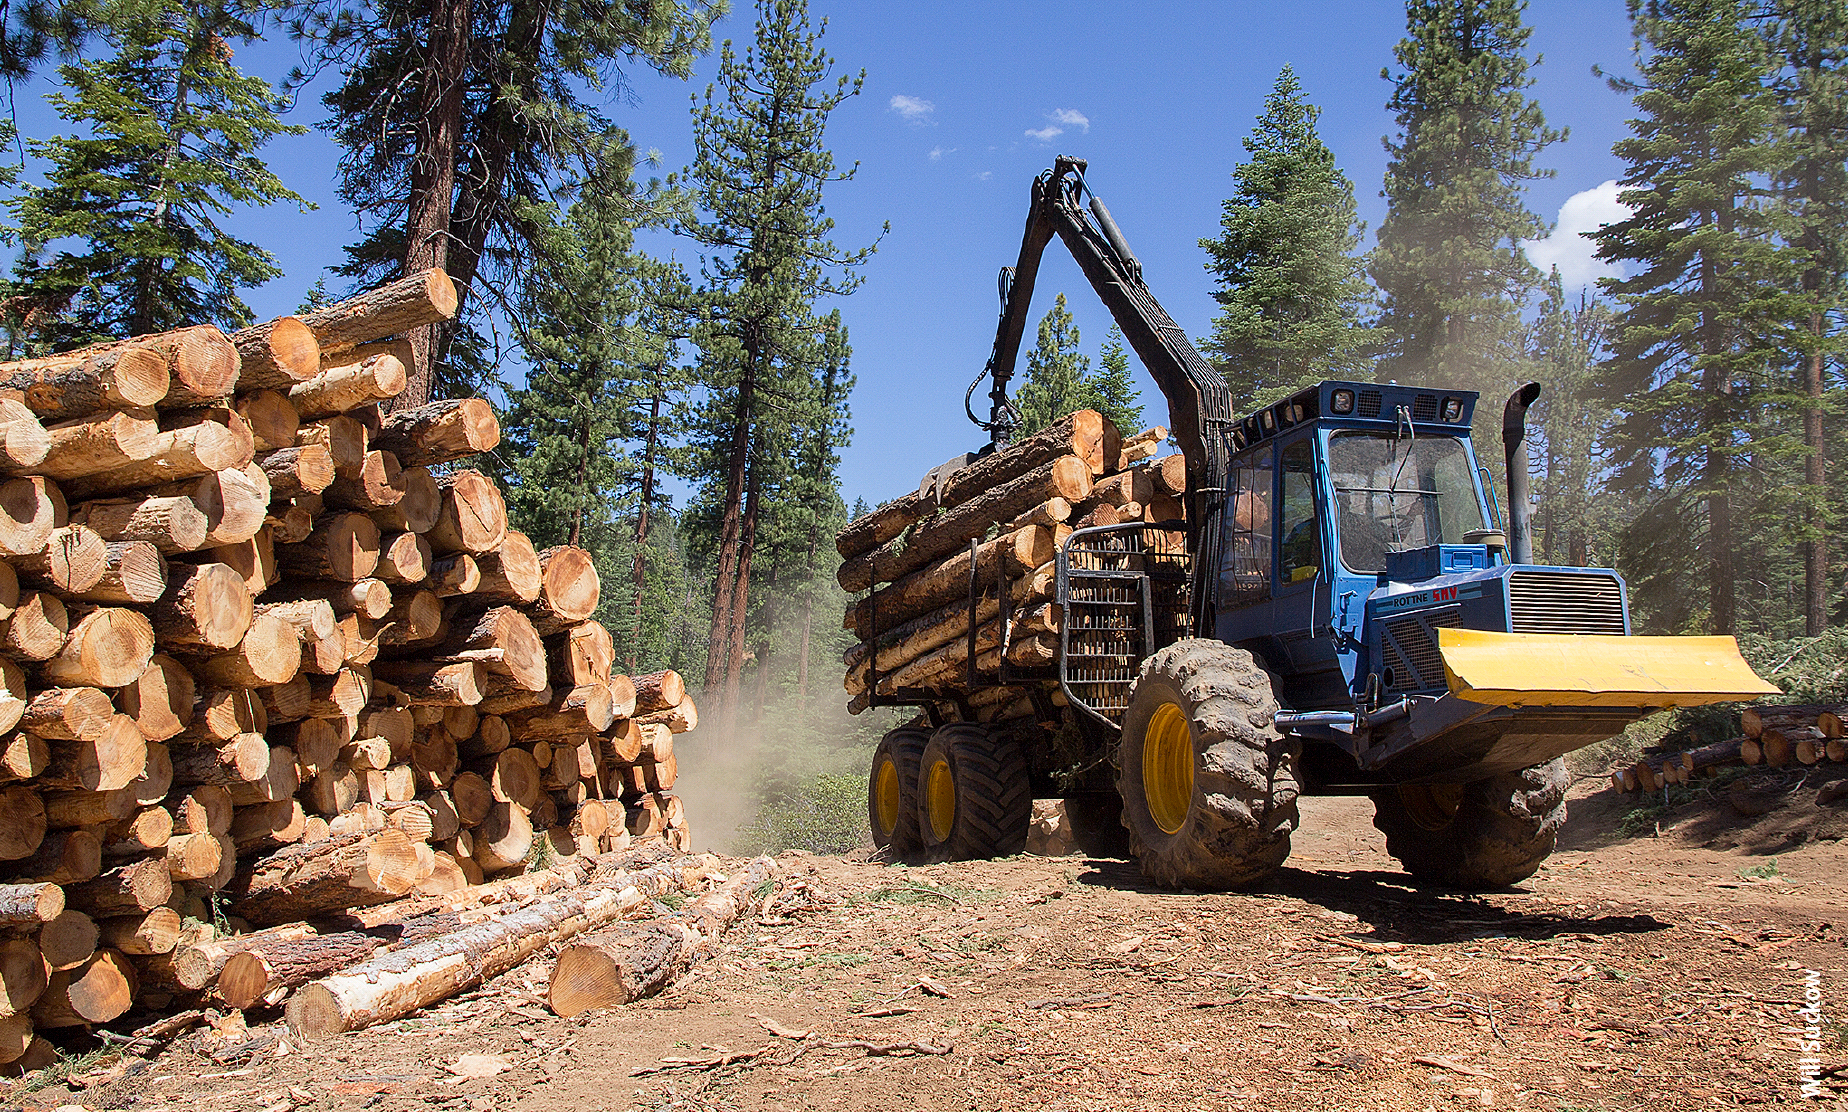 Revenue from the sale of forest products generated by thinning operations can help to offset the costs of fuel treatments. A forwarder collects marketable logs at the U.S. Forest Service Yeti Fuels Reduction Project near Lake Tahoe.